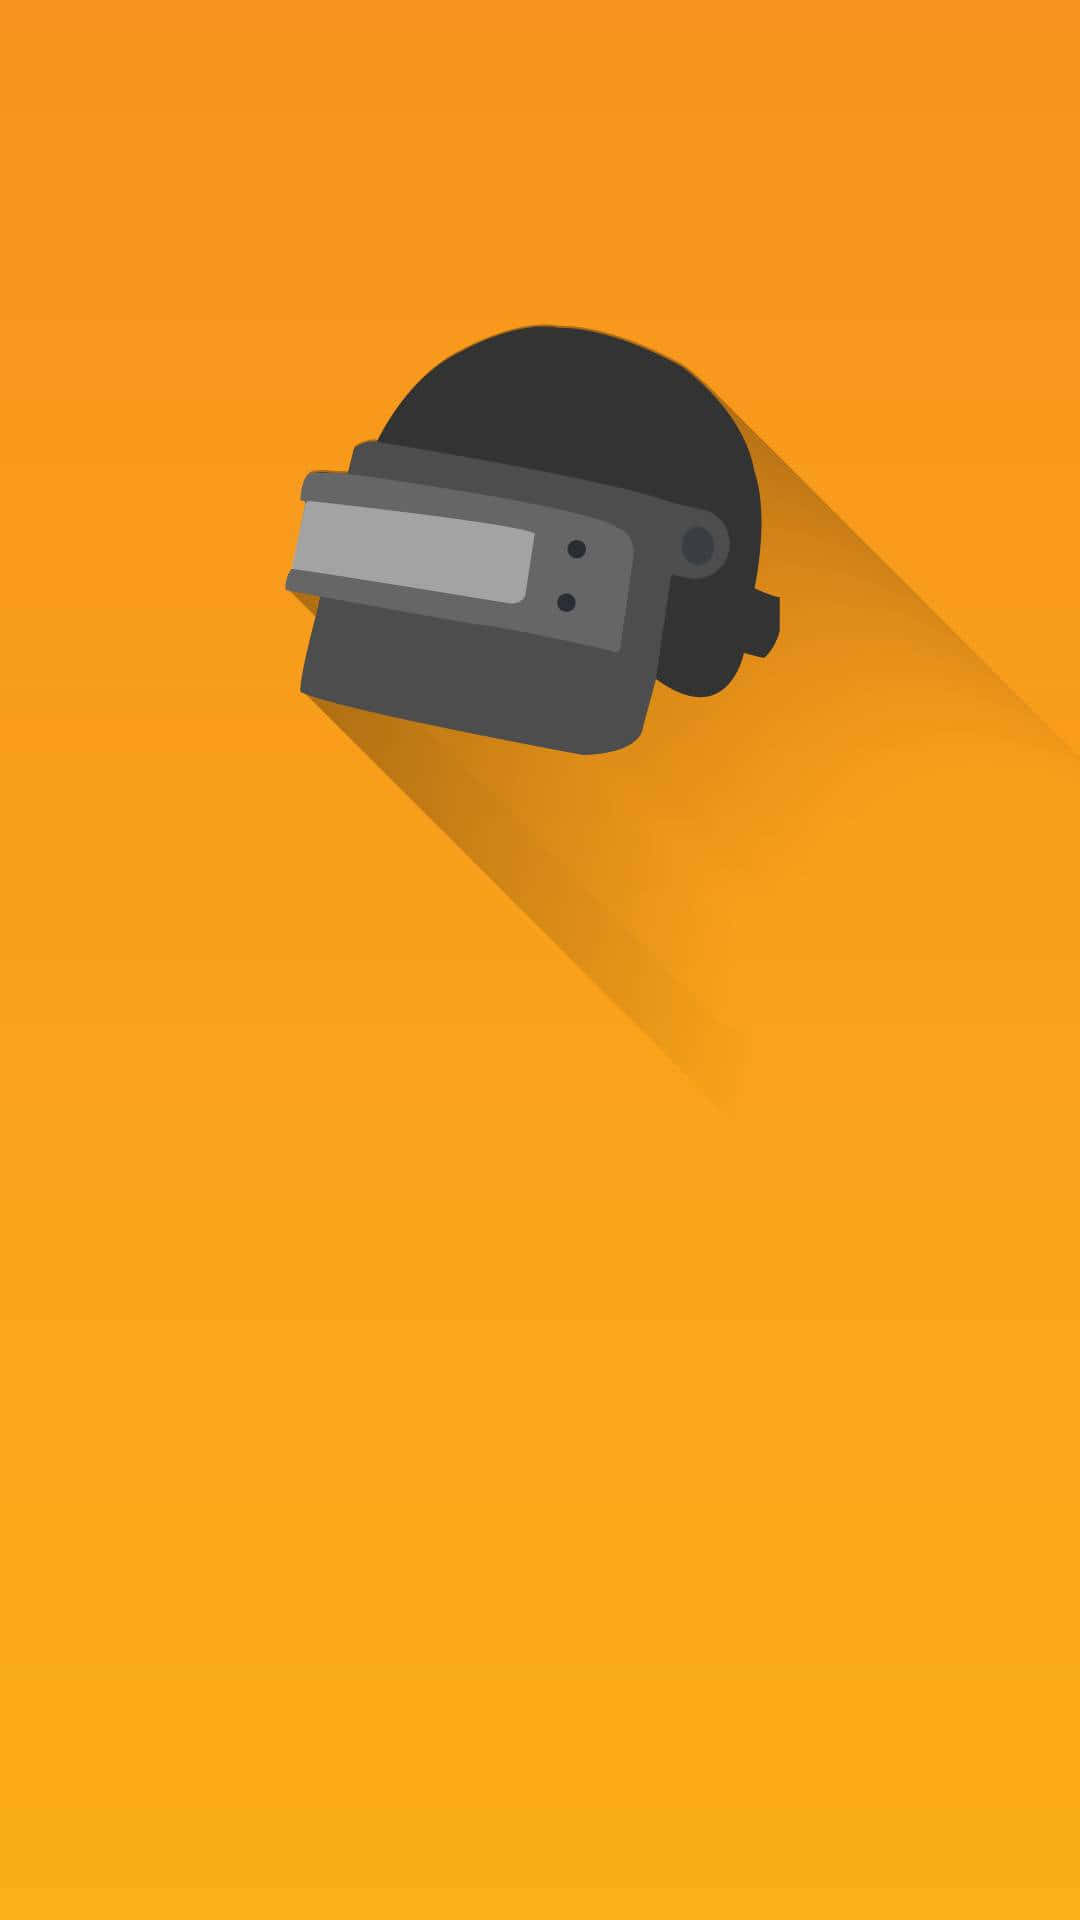 A Flat Icon Of A Helmet On An Orange Background Wallpaper